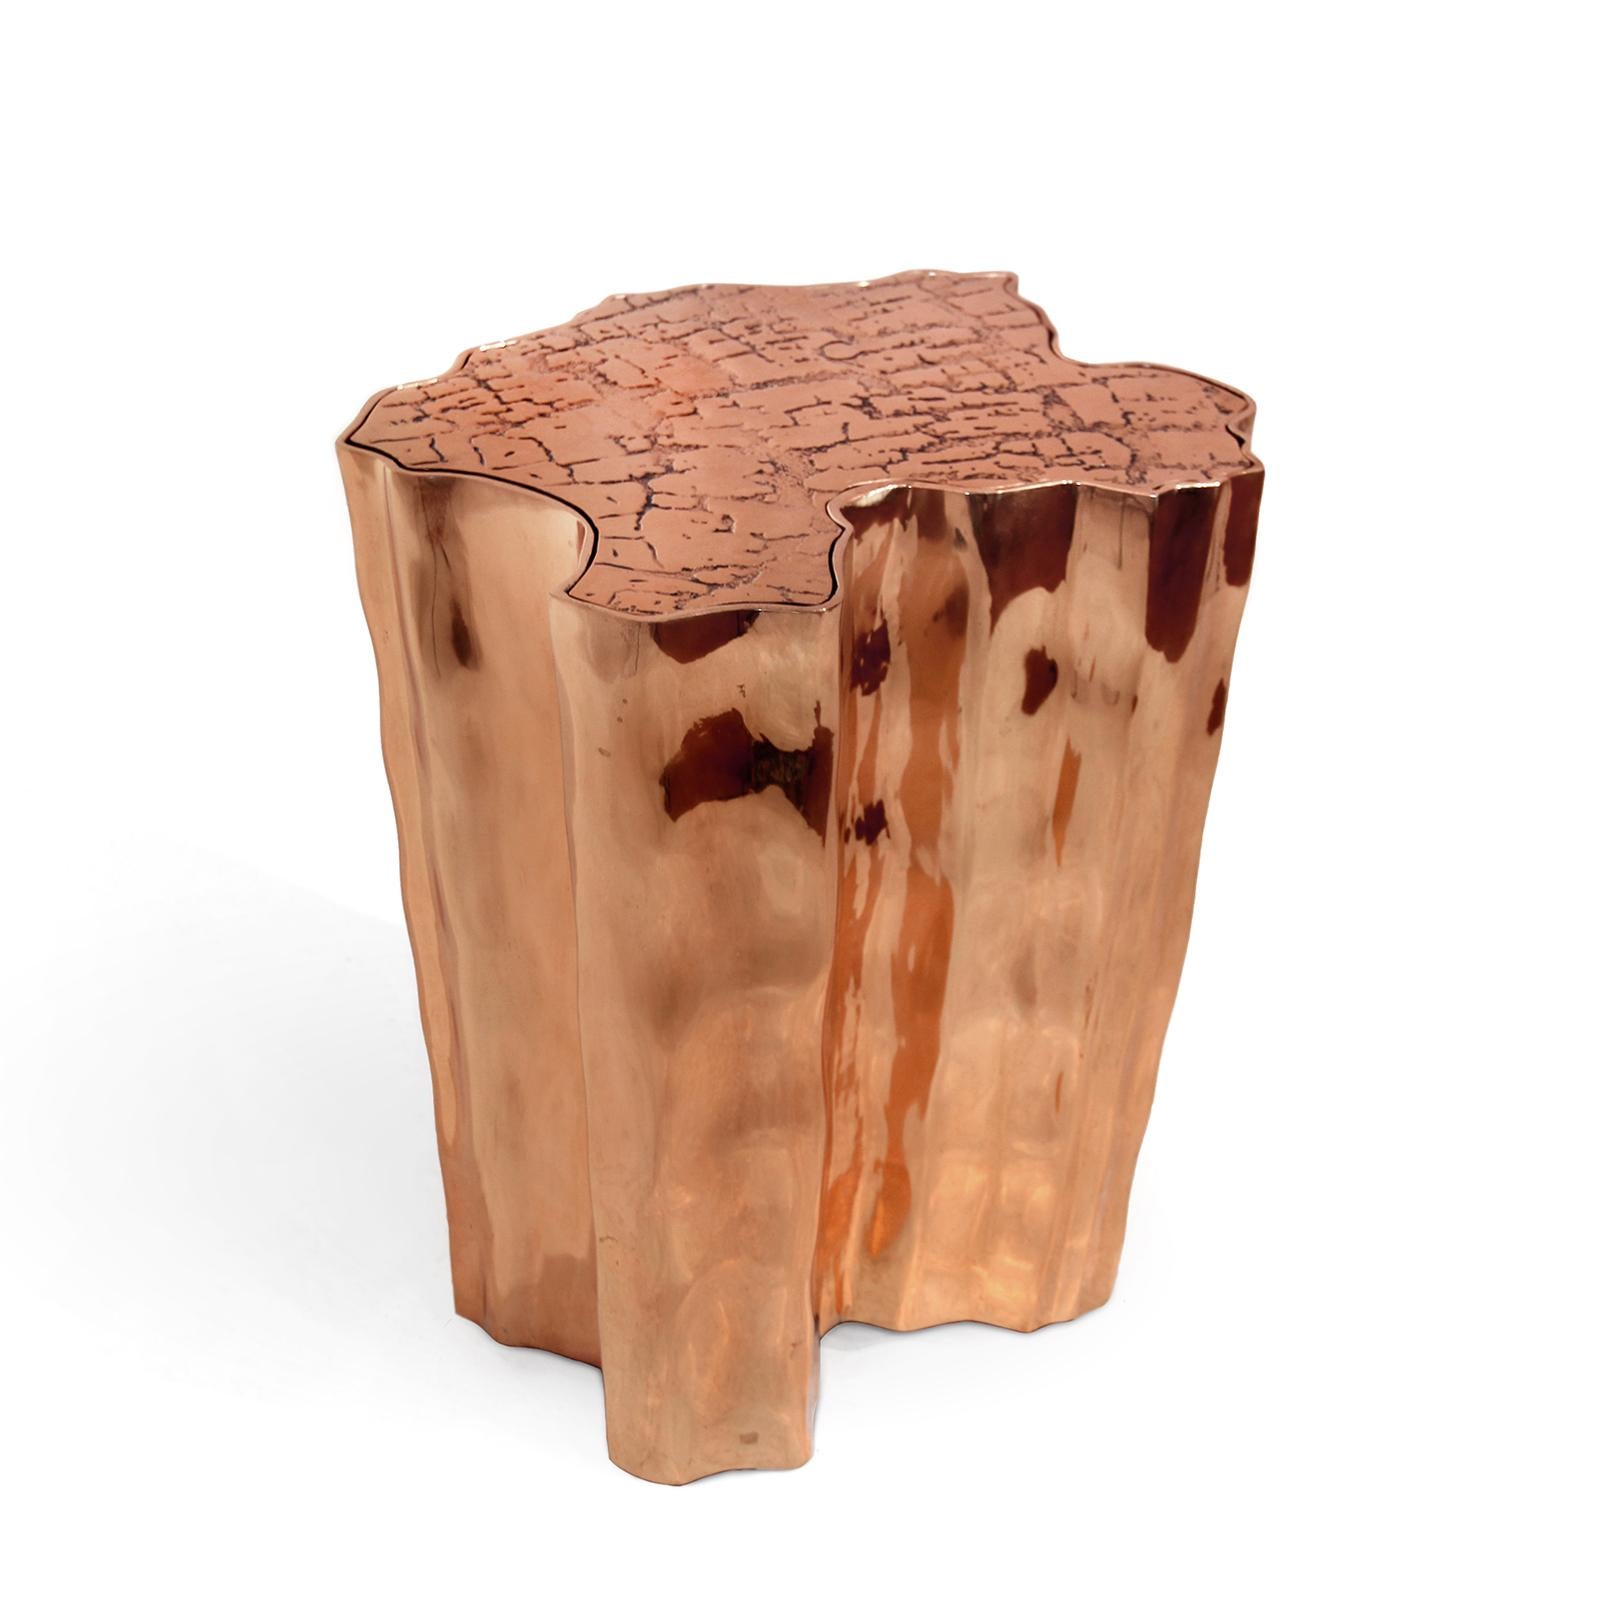 Side table heaven copper in casted aluminium
Covered with polished copper.
Also available in coffee table heaven copper.